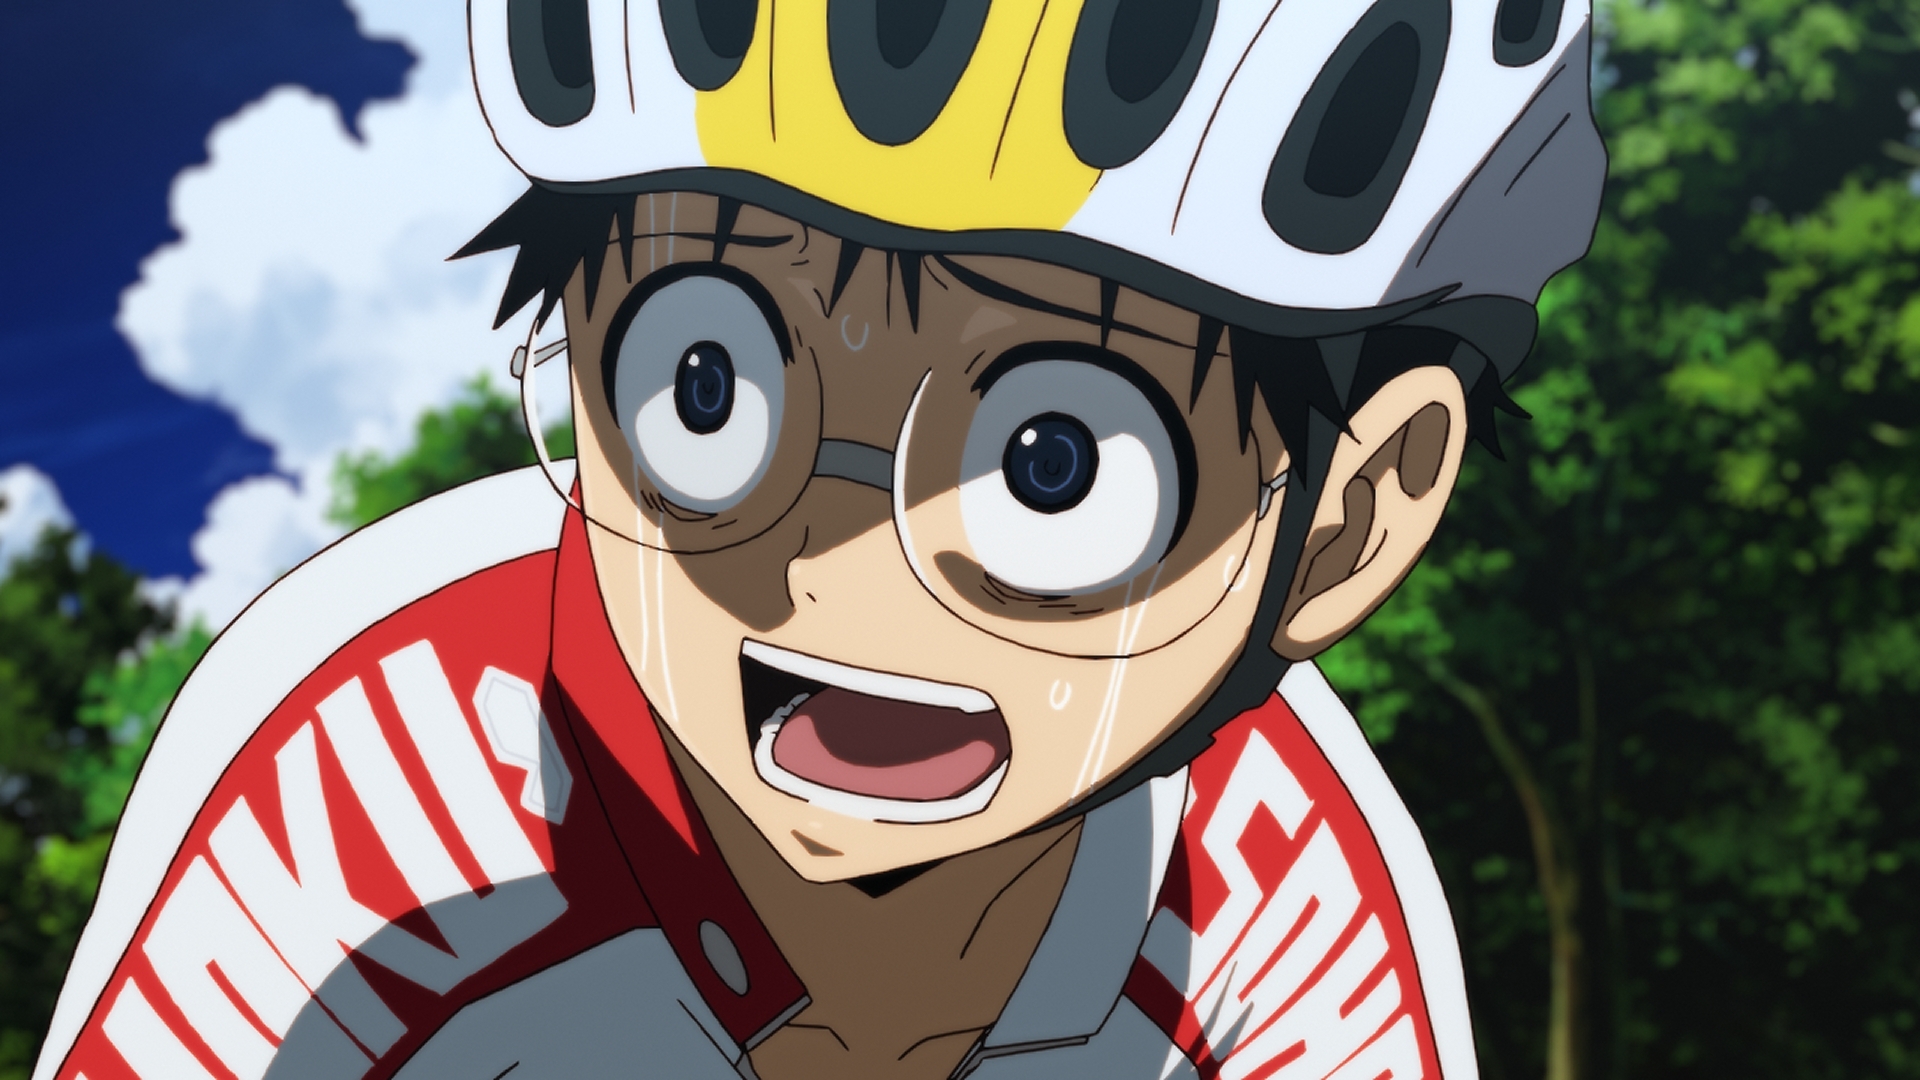 Sakamichi Onoda expresses a look of surprise and shock while riding his bicycle in a scene from the Yowamushi Pedal TV anime.